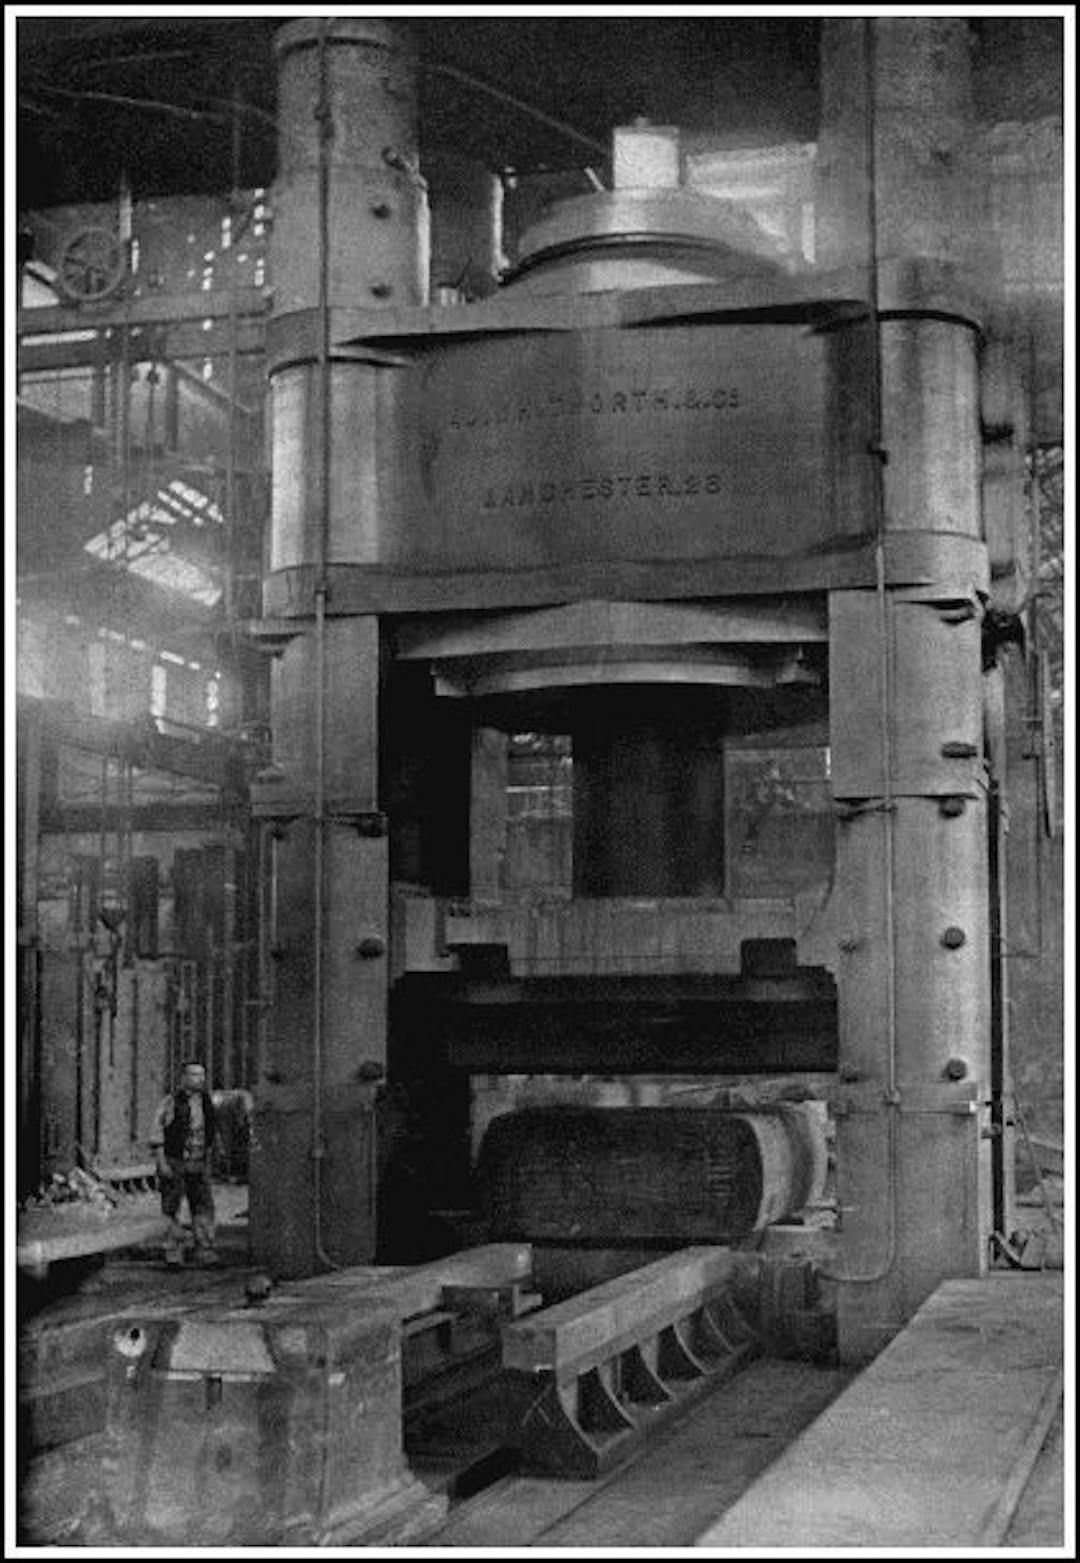 A HUGE HYDRAULIC PRESS
The 12,000-ton pressure Whitworth Hydraulic Press, used for consolidating steel ingots for armour-plating. Water is forced into the ram cylinder at a pressure of three tons to the square inch. Notice the man to the left of the press.